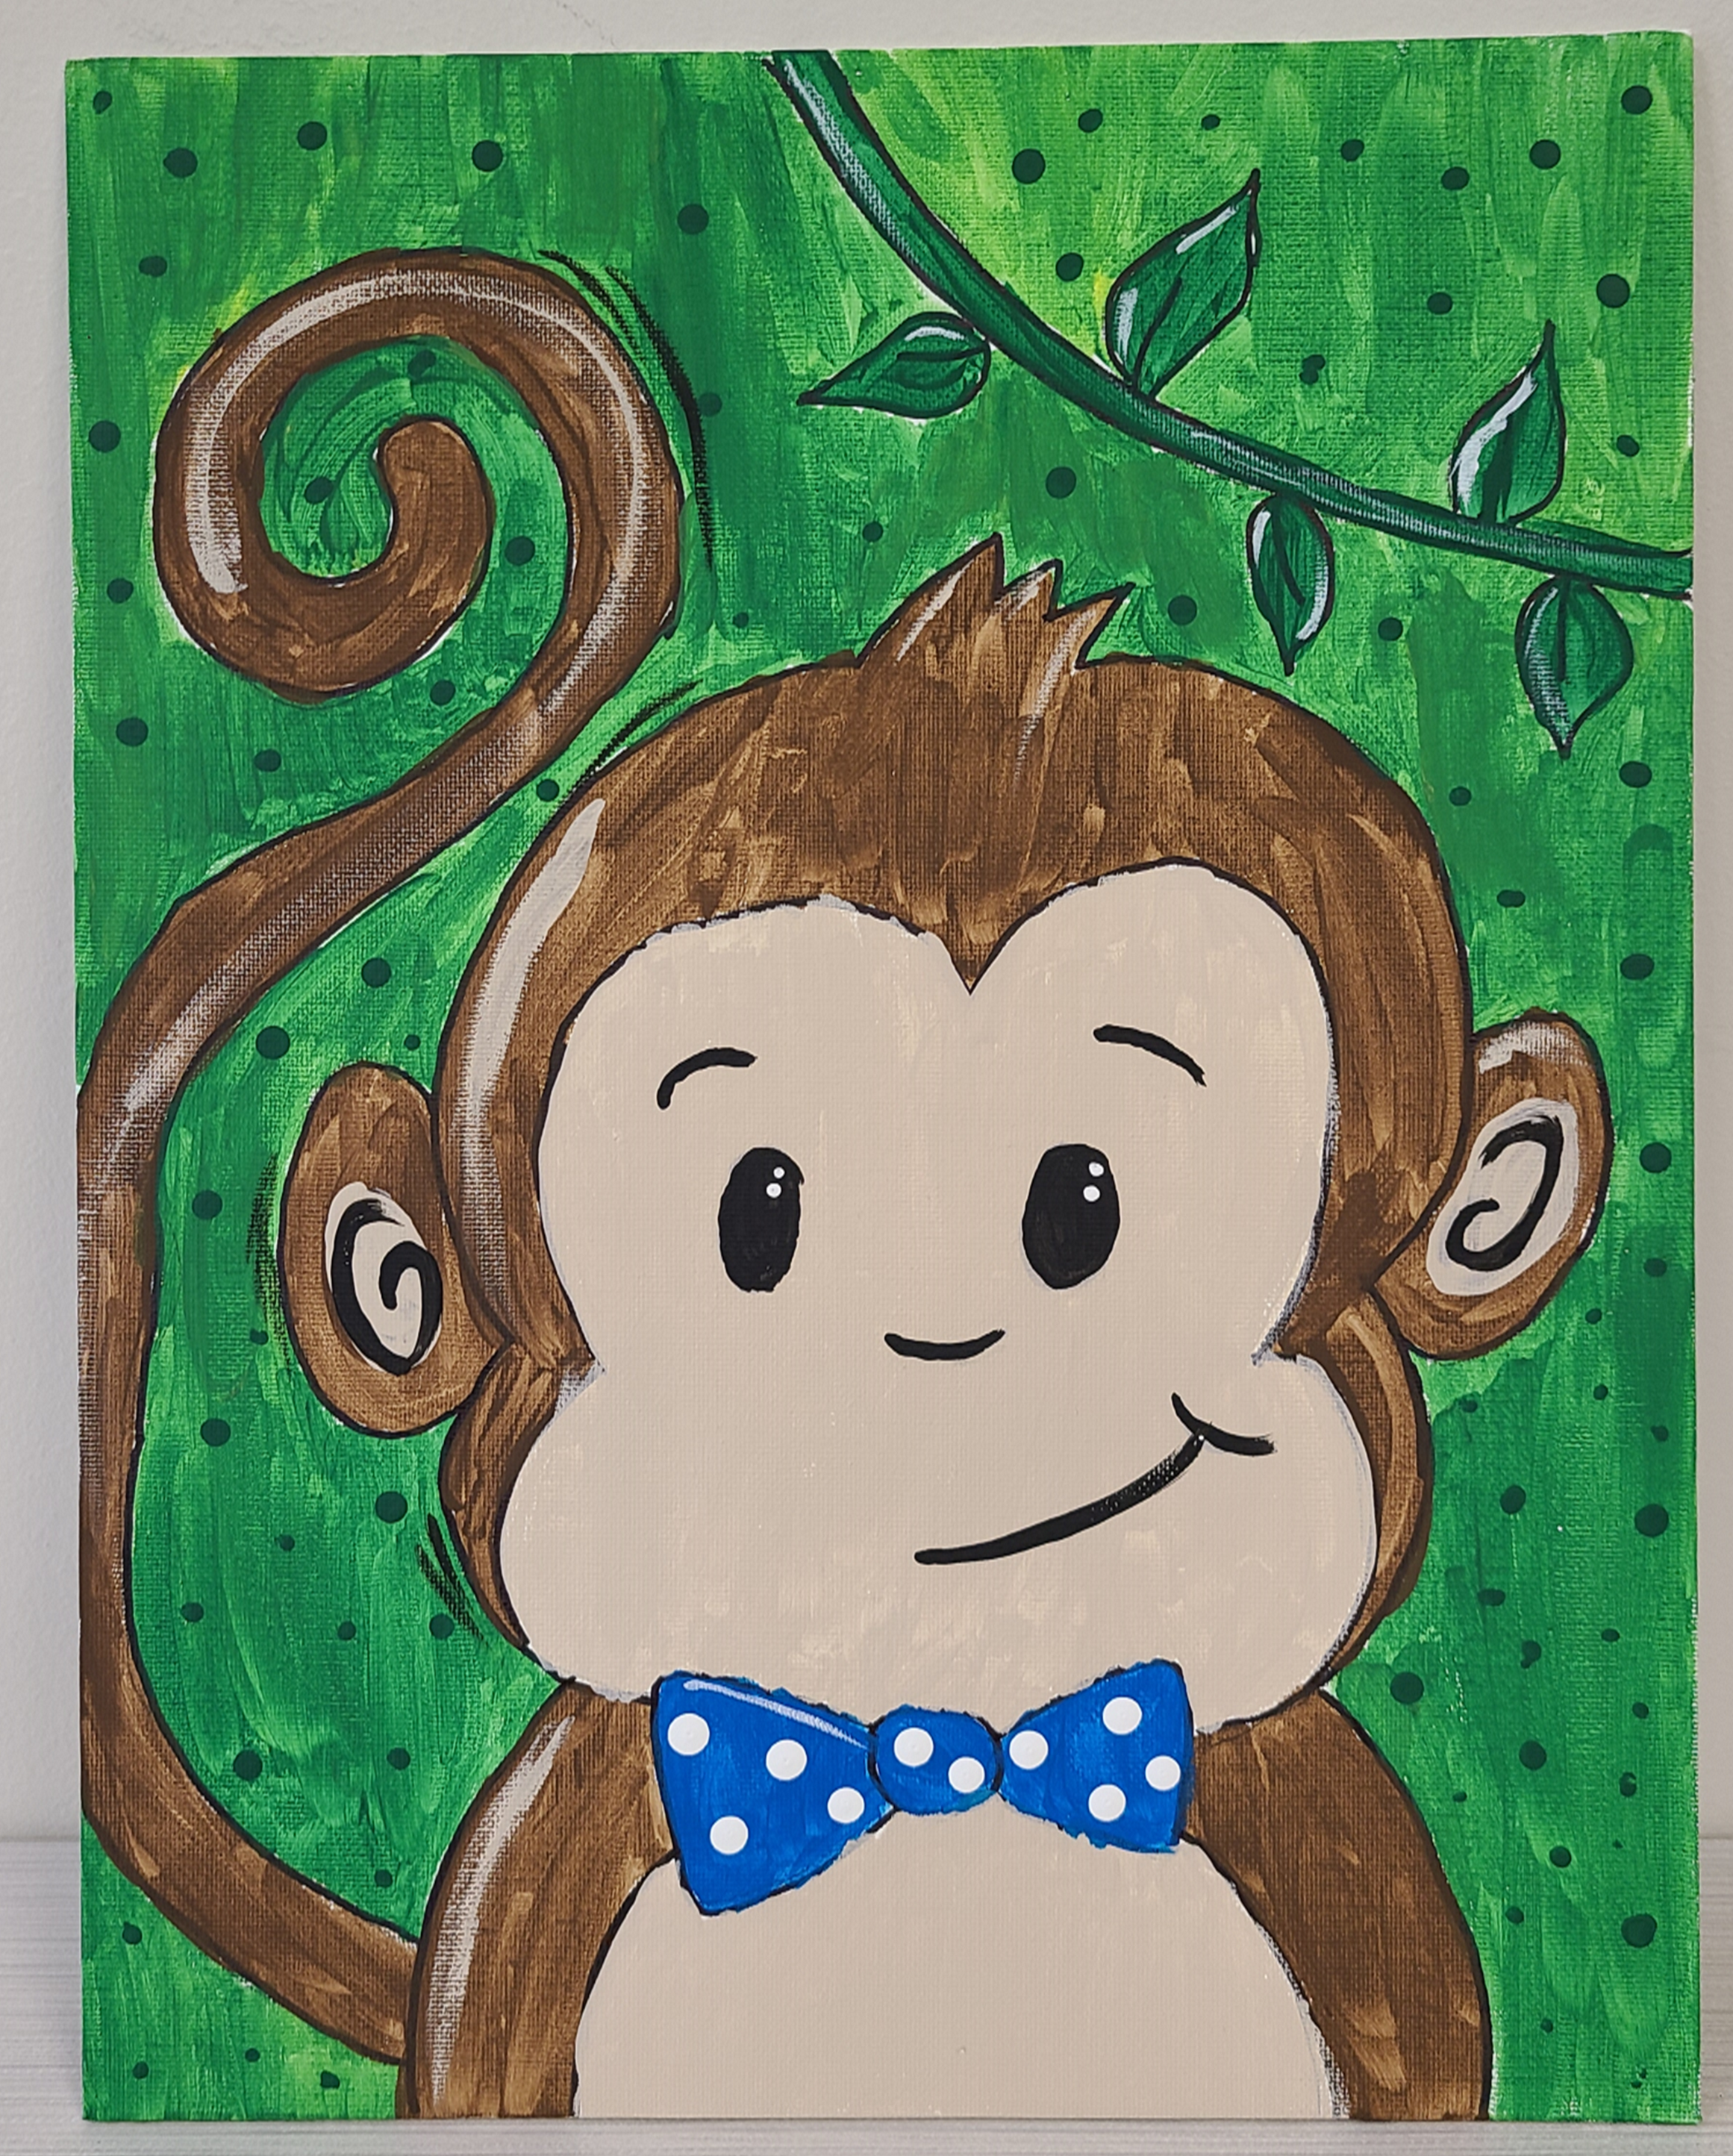 Cartoon monkey with blue bow tie on a green background